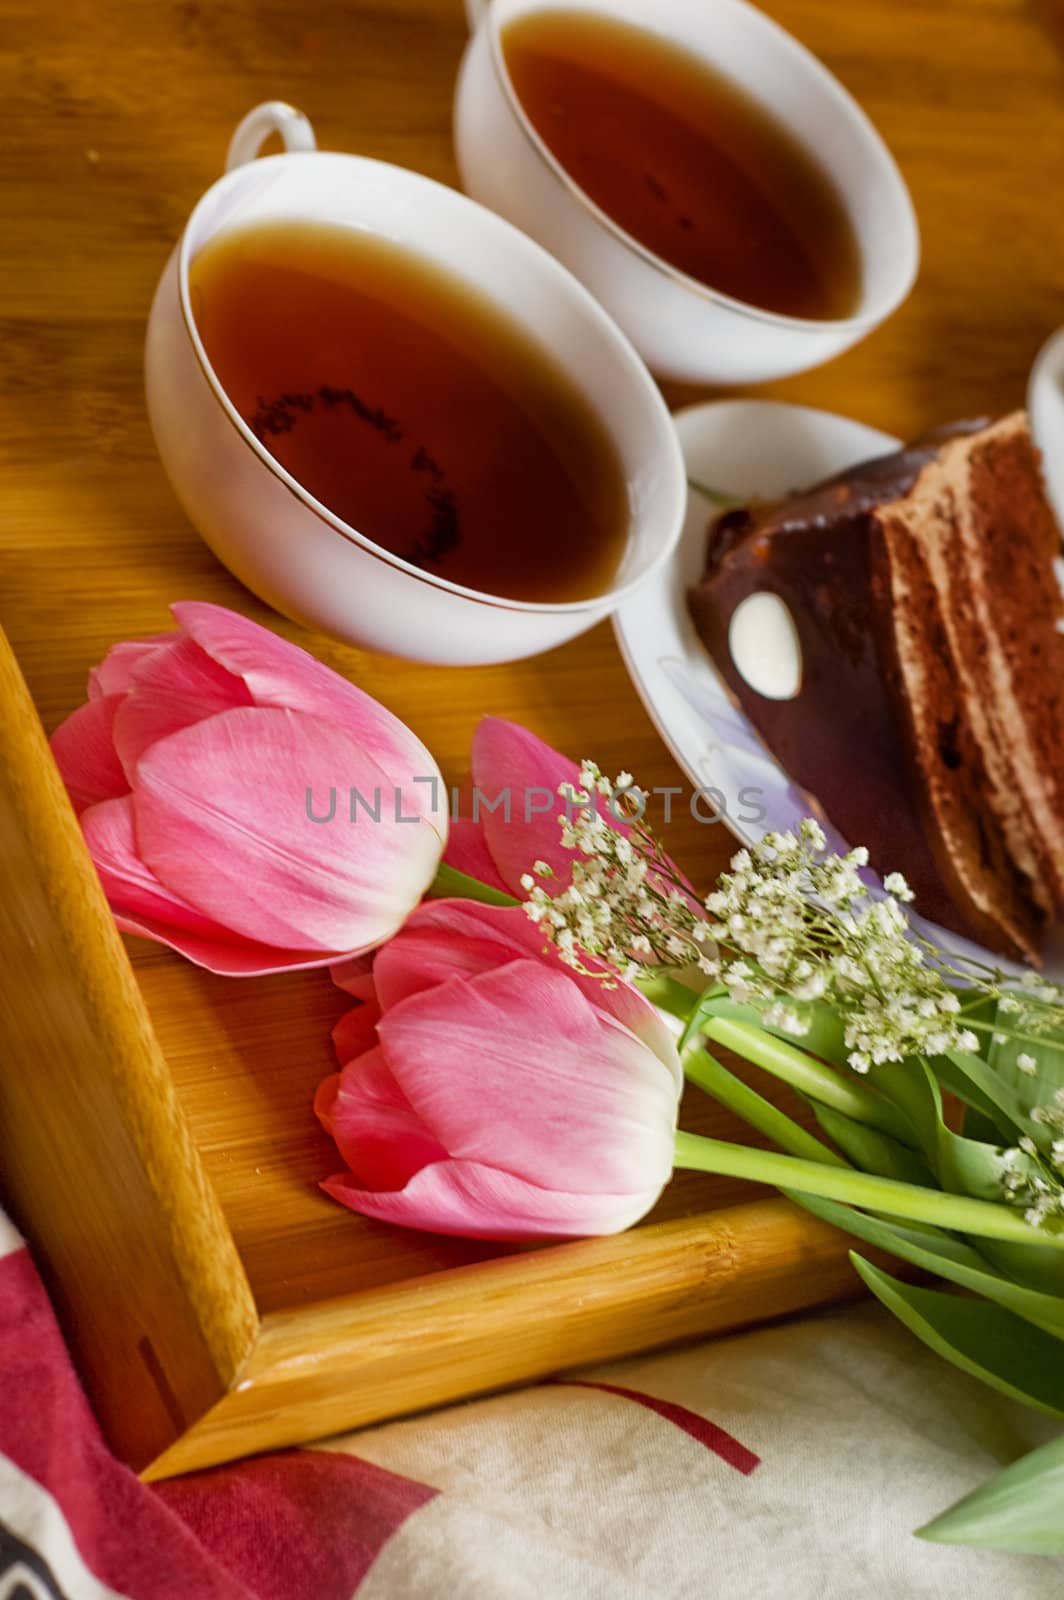 Breakfast tray on bed with tea, cakes and tulips